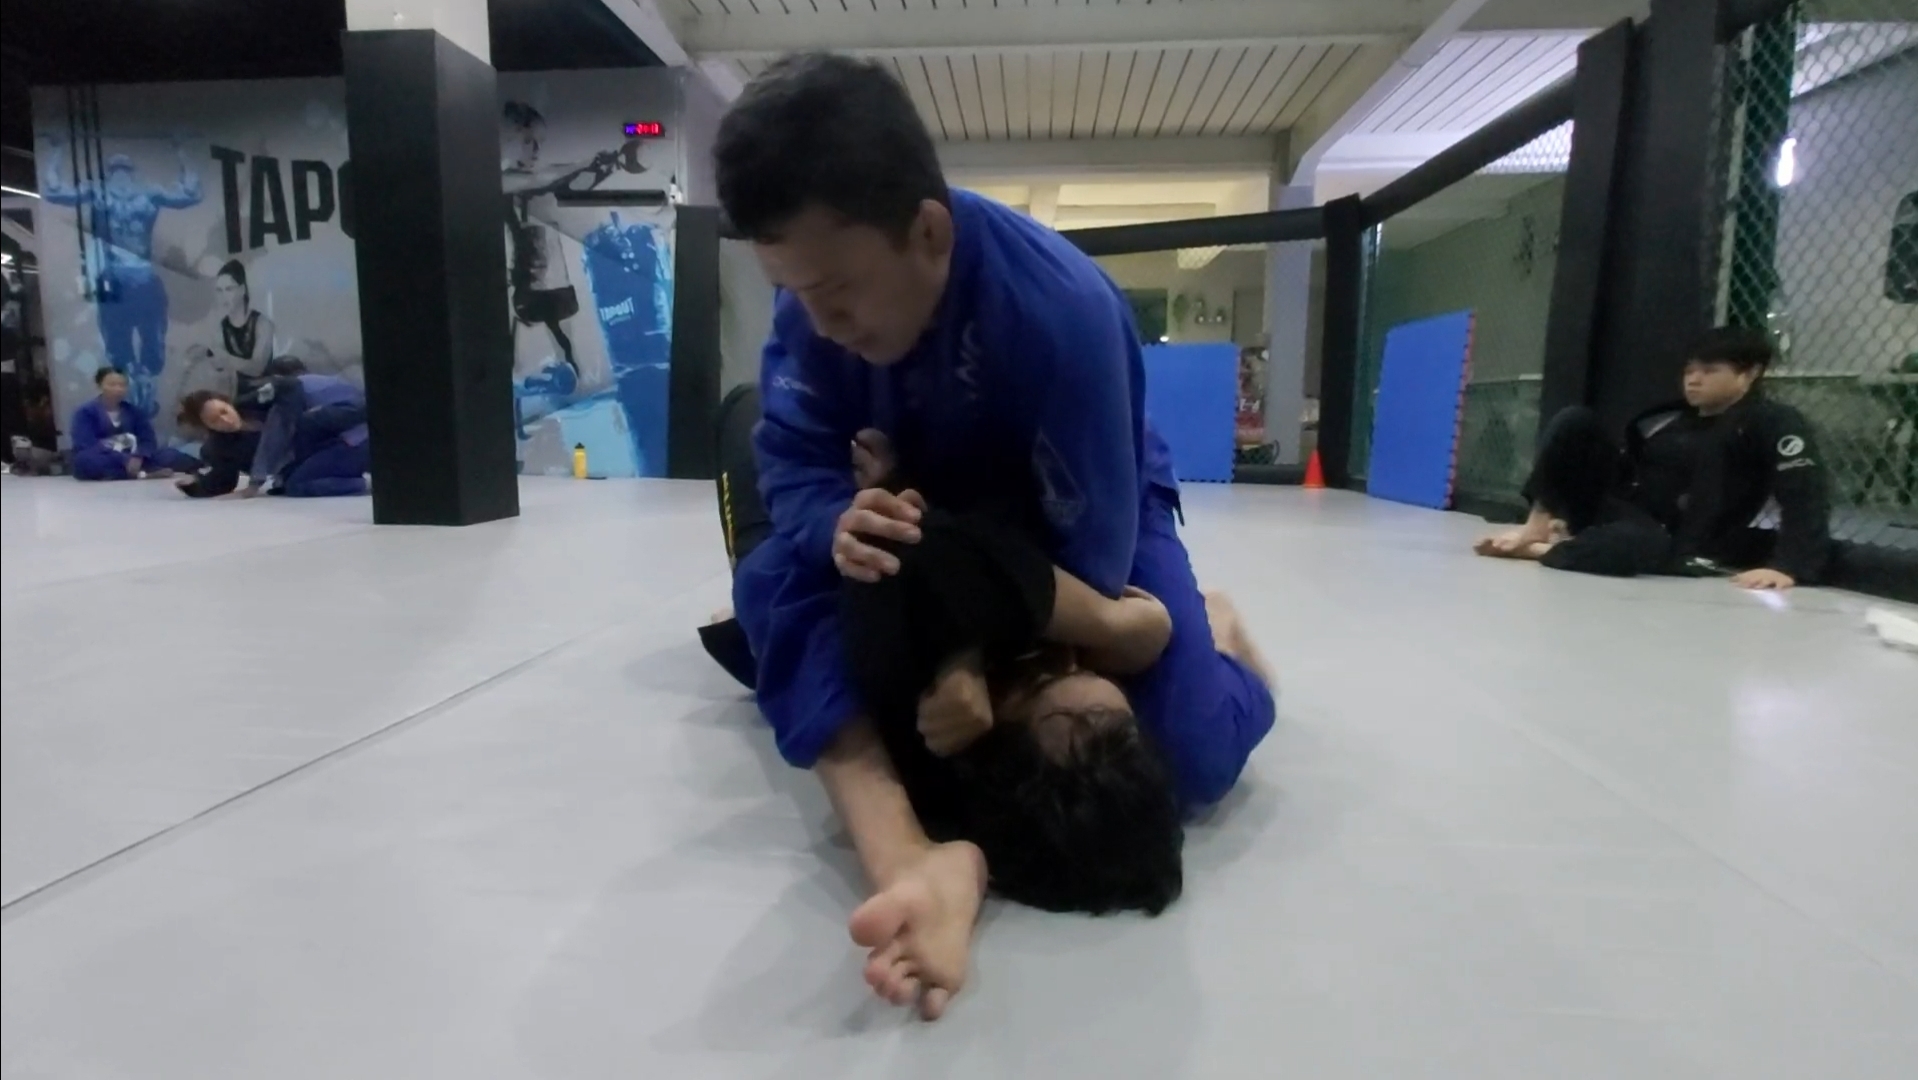 BJJ Rolling Tips: To Improve, Not Prove